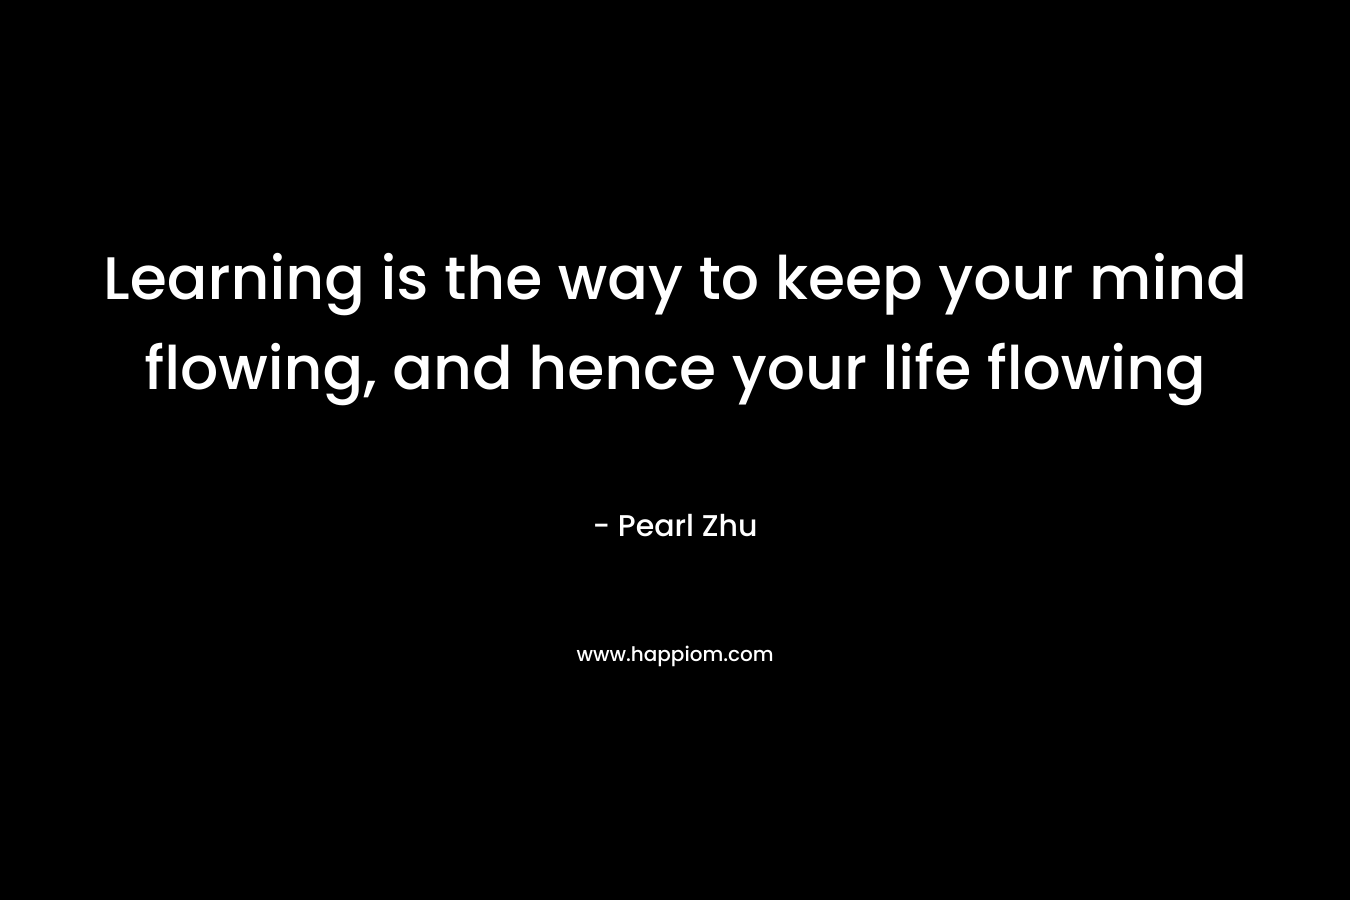 Learning is the way to keep your mind flowing, and hence your life flowing